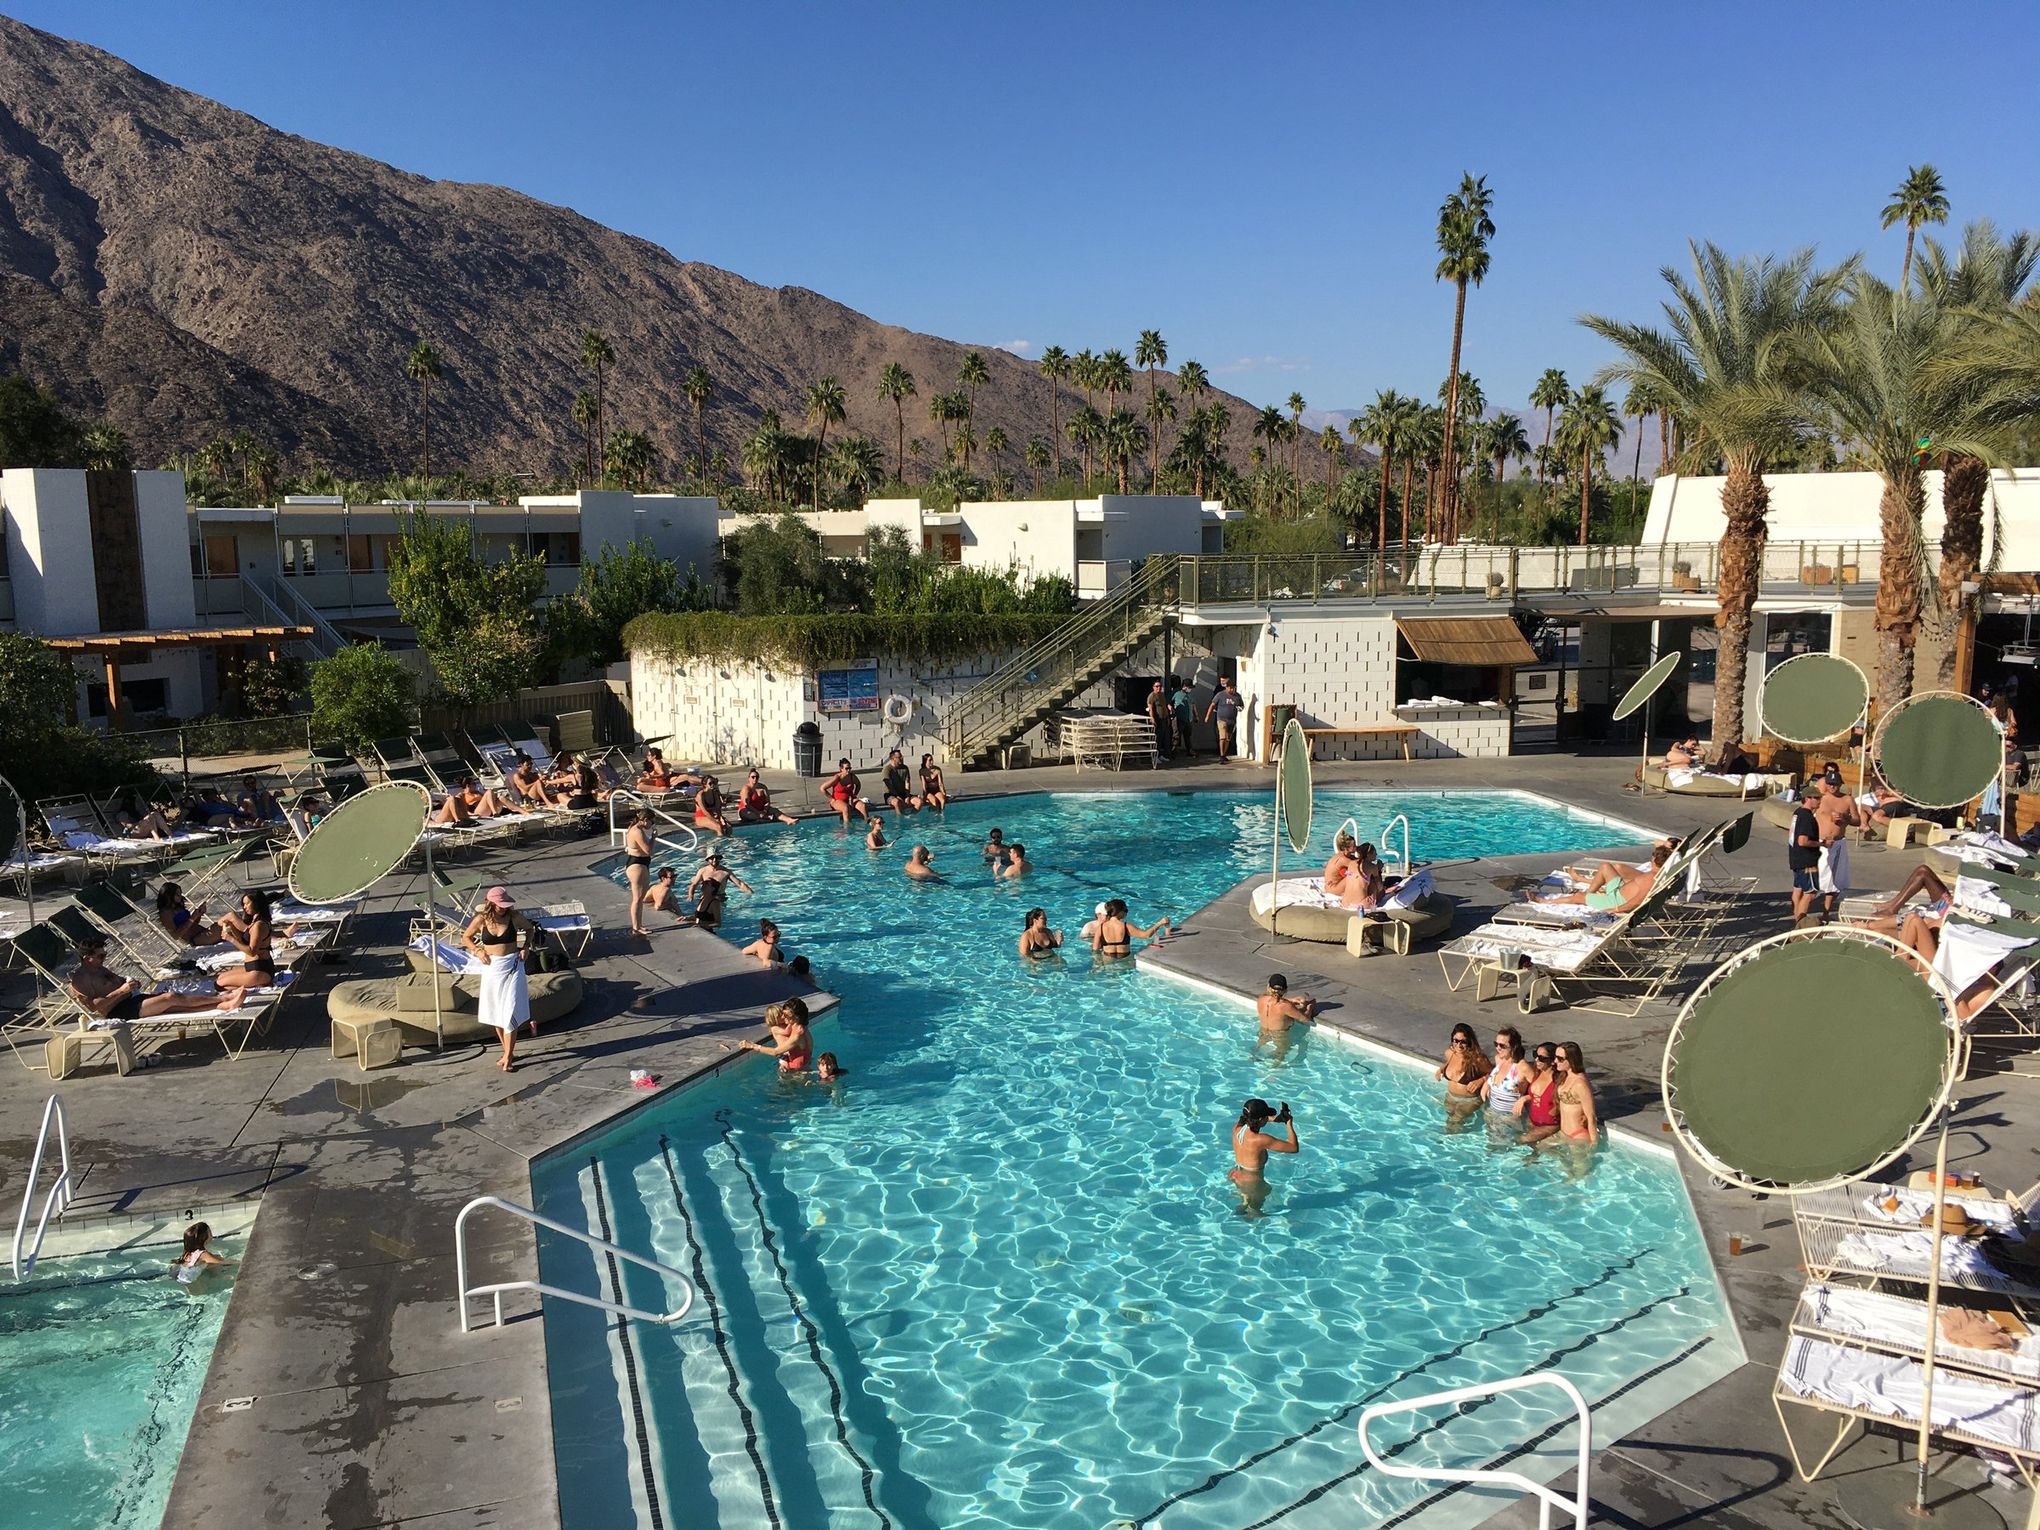 Palm Springs beyond the poolside: lonesome hikes, alien-inspired